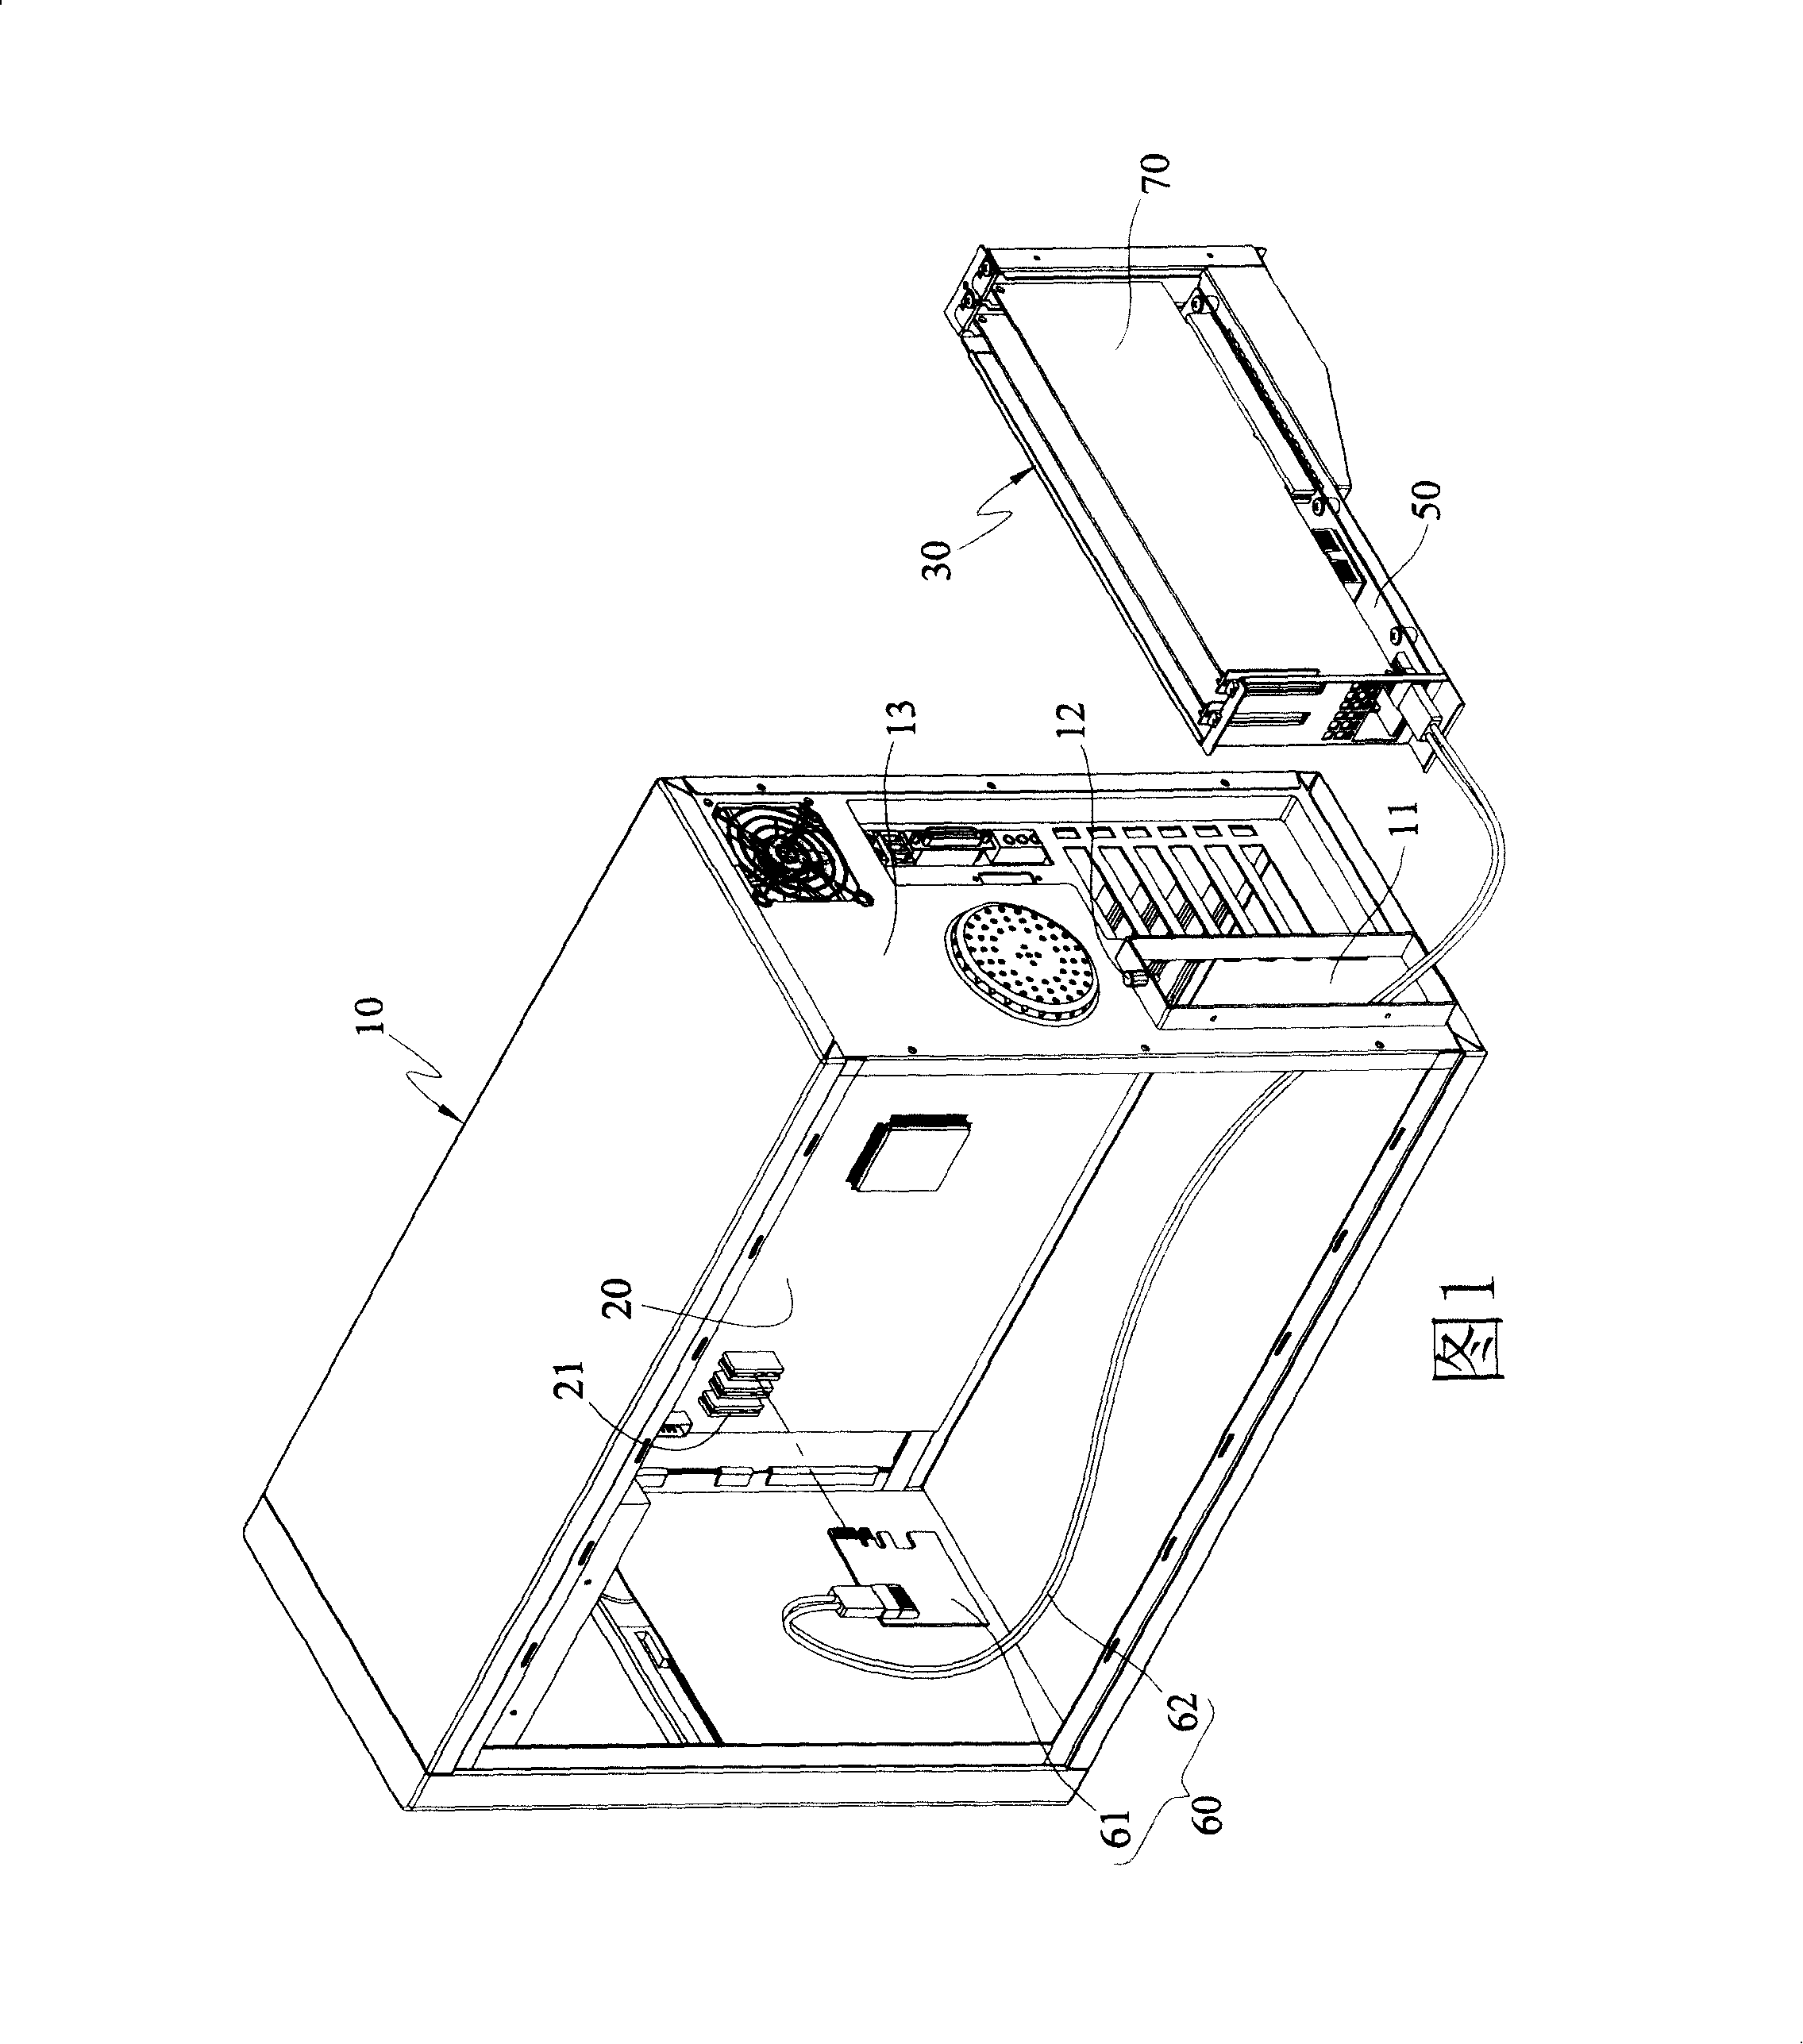 Extending device of abstraction type adapting card